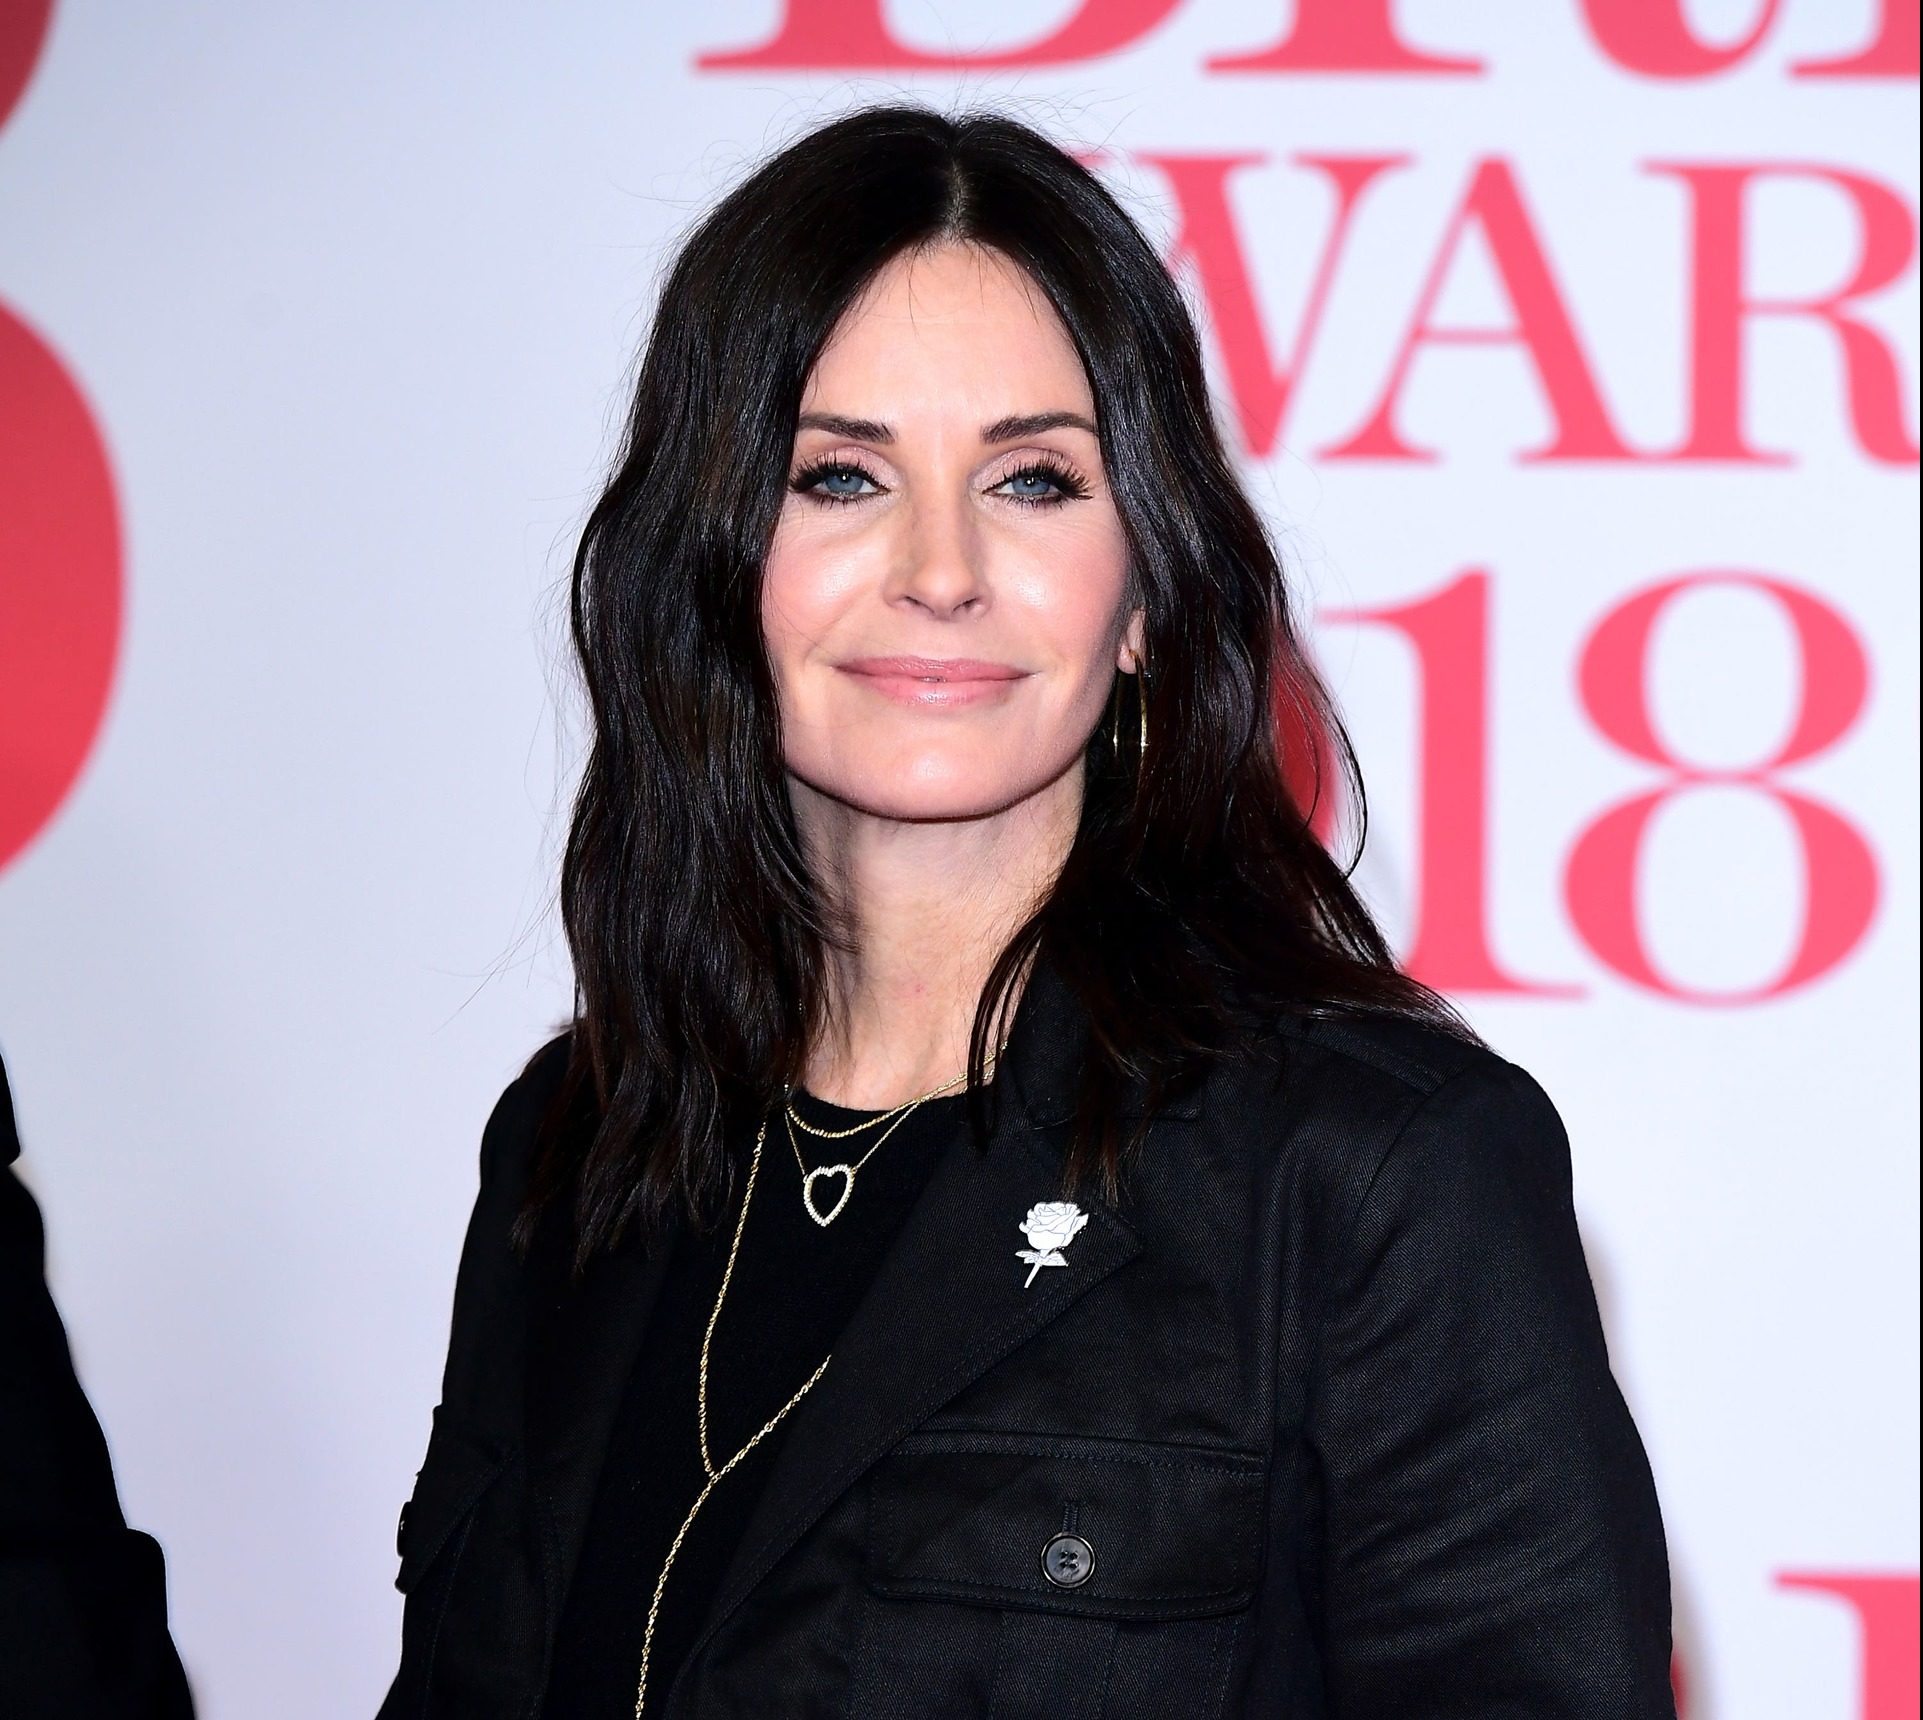 Courteney Cox has been honoured with a star on the Hollywood Walk of Fame.